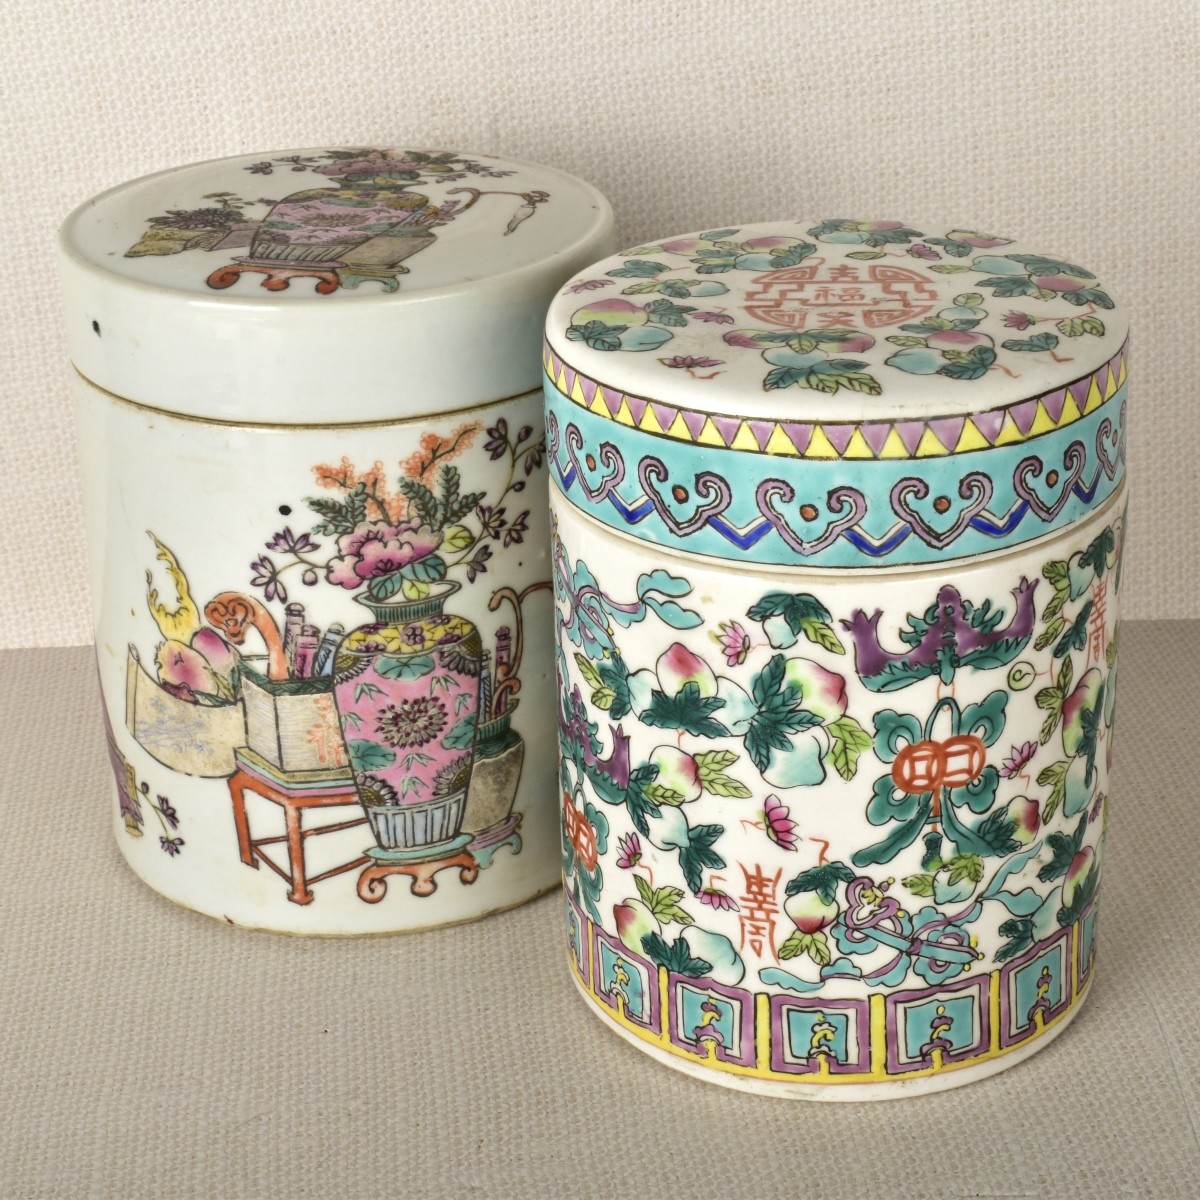 Chinese Porcelain Covered Jars